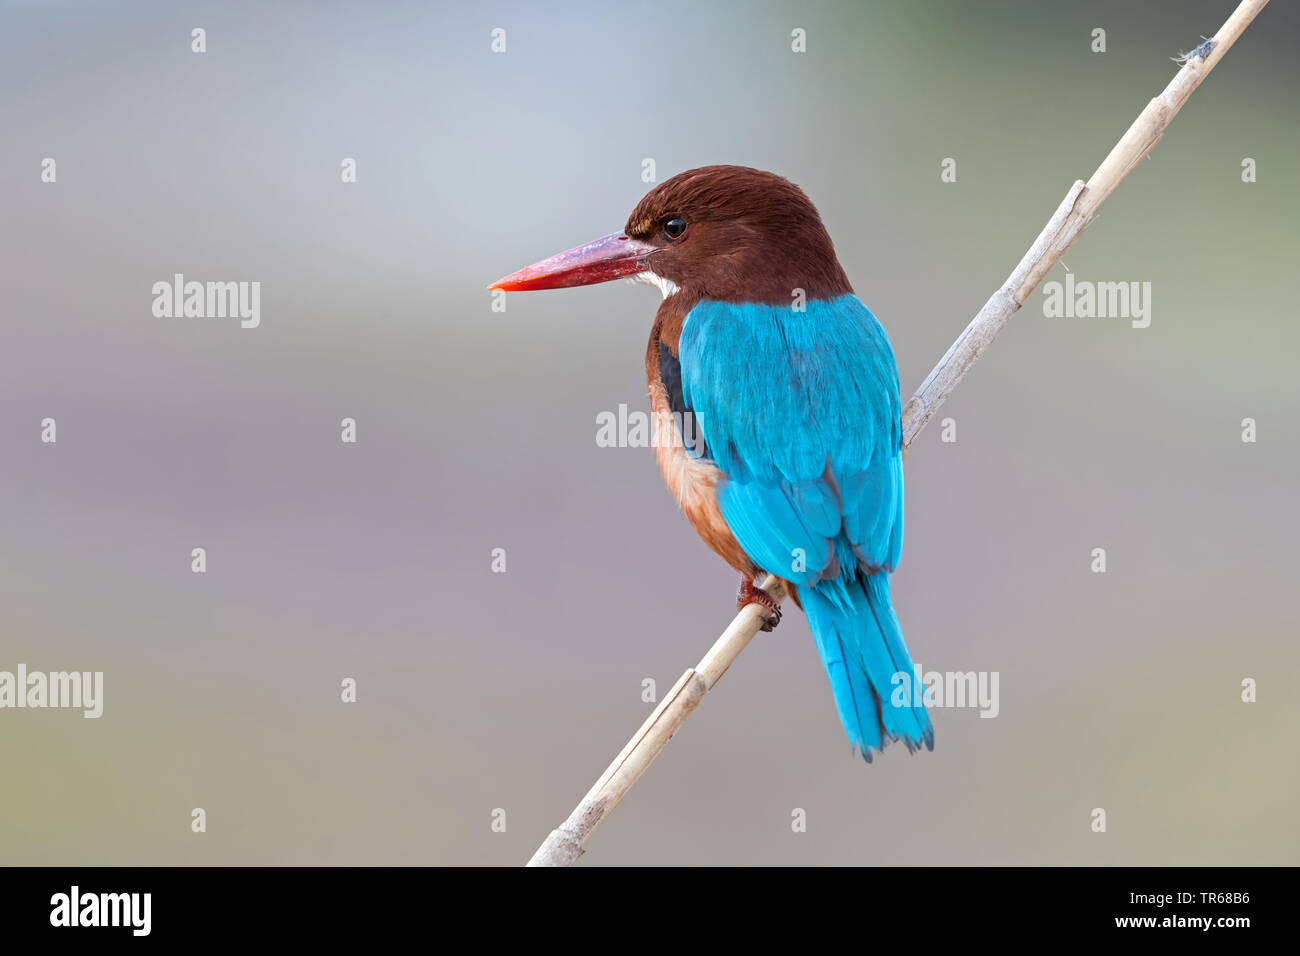 white-throated kingfisher, White-breasted Kingfisher, River Kingfisher (Halcyon smyrnensis), sitting on reed, Israel Stock Photo